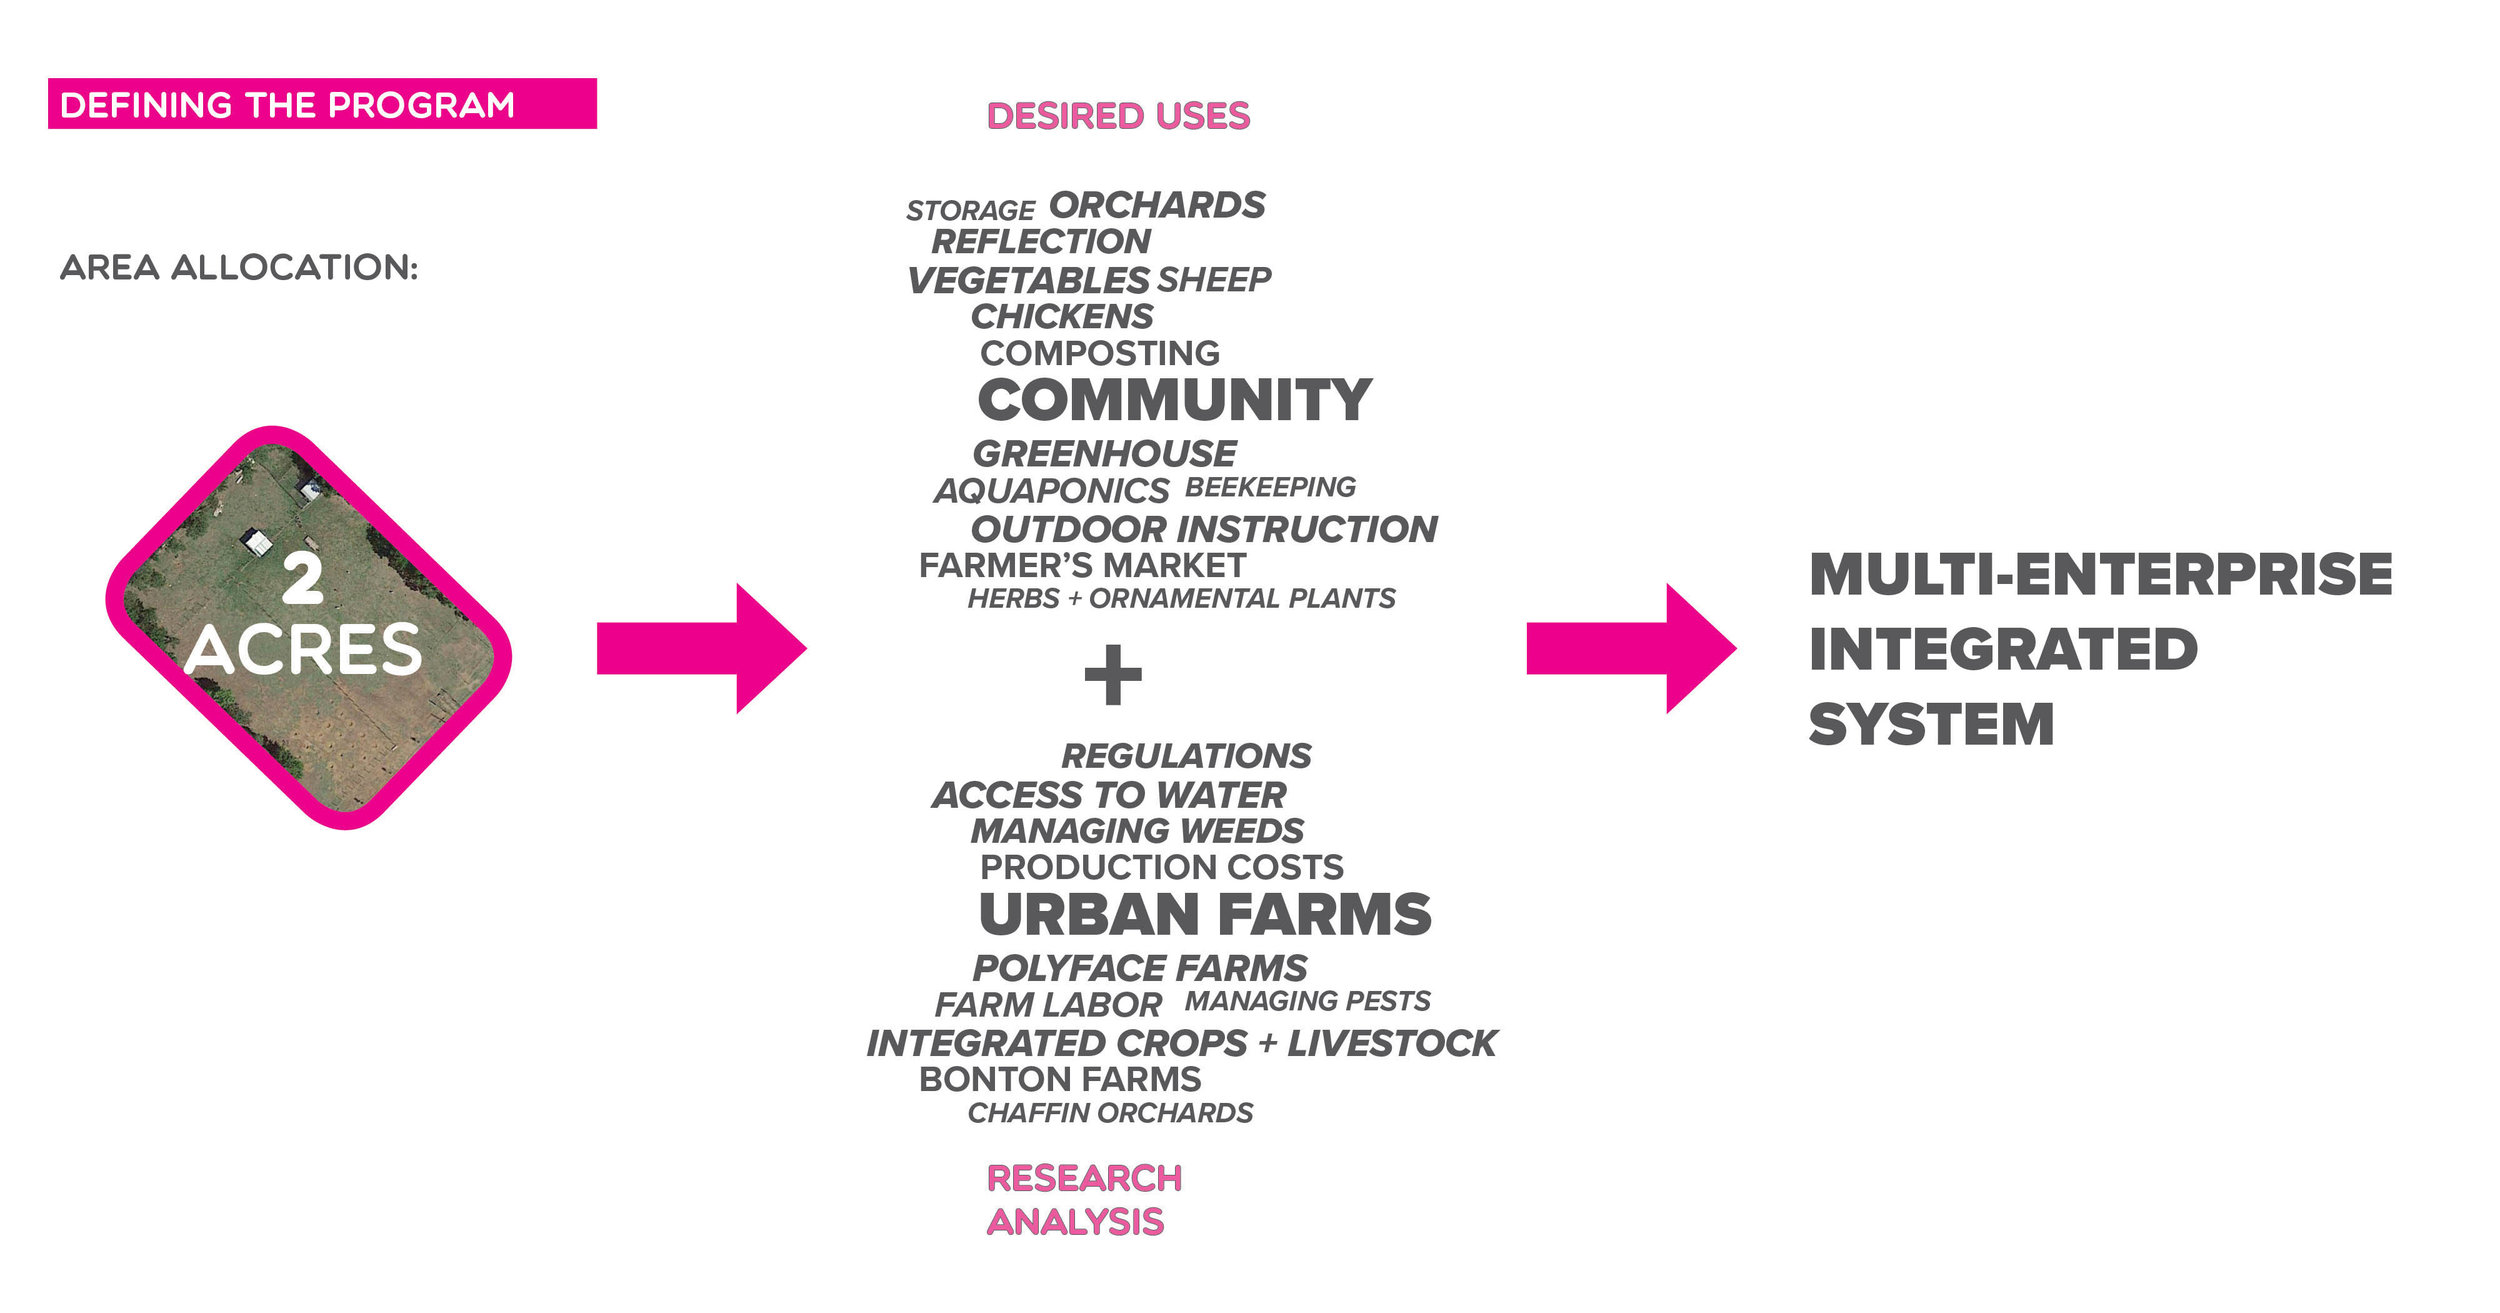  The DELINEATOR team met with local leaders in 2017 to explore the selected site and discuss all of the desired uses and goals for the urban farm. The team then conducted extensive research into the various programs and contemporary agricultural syst